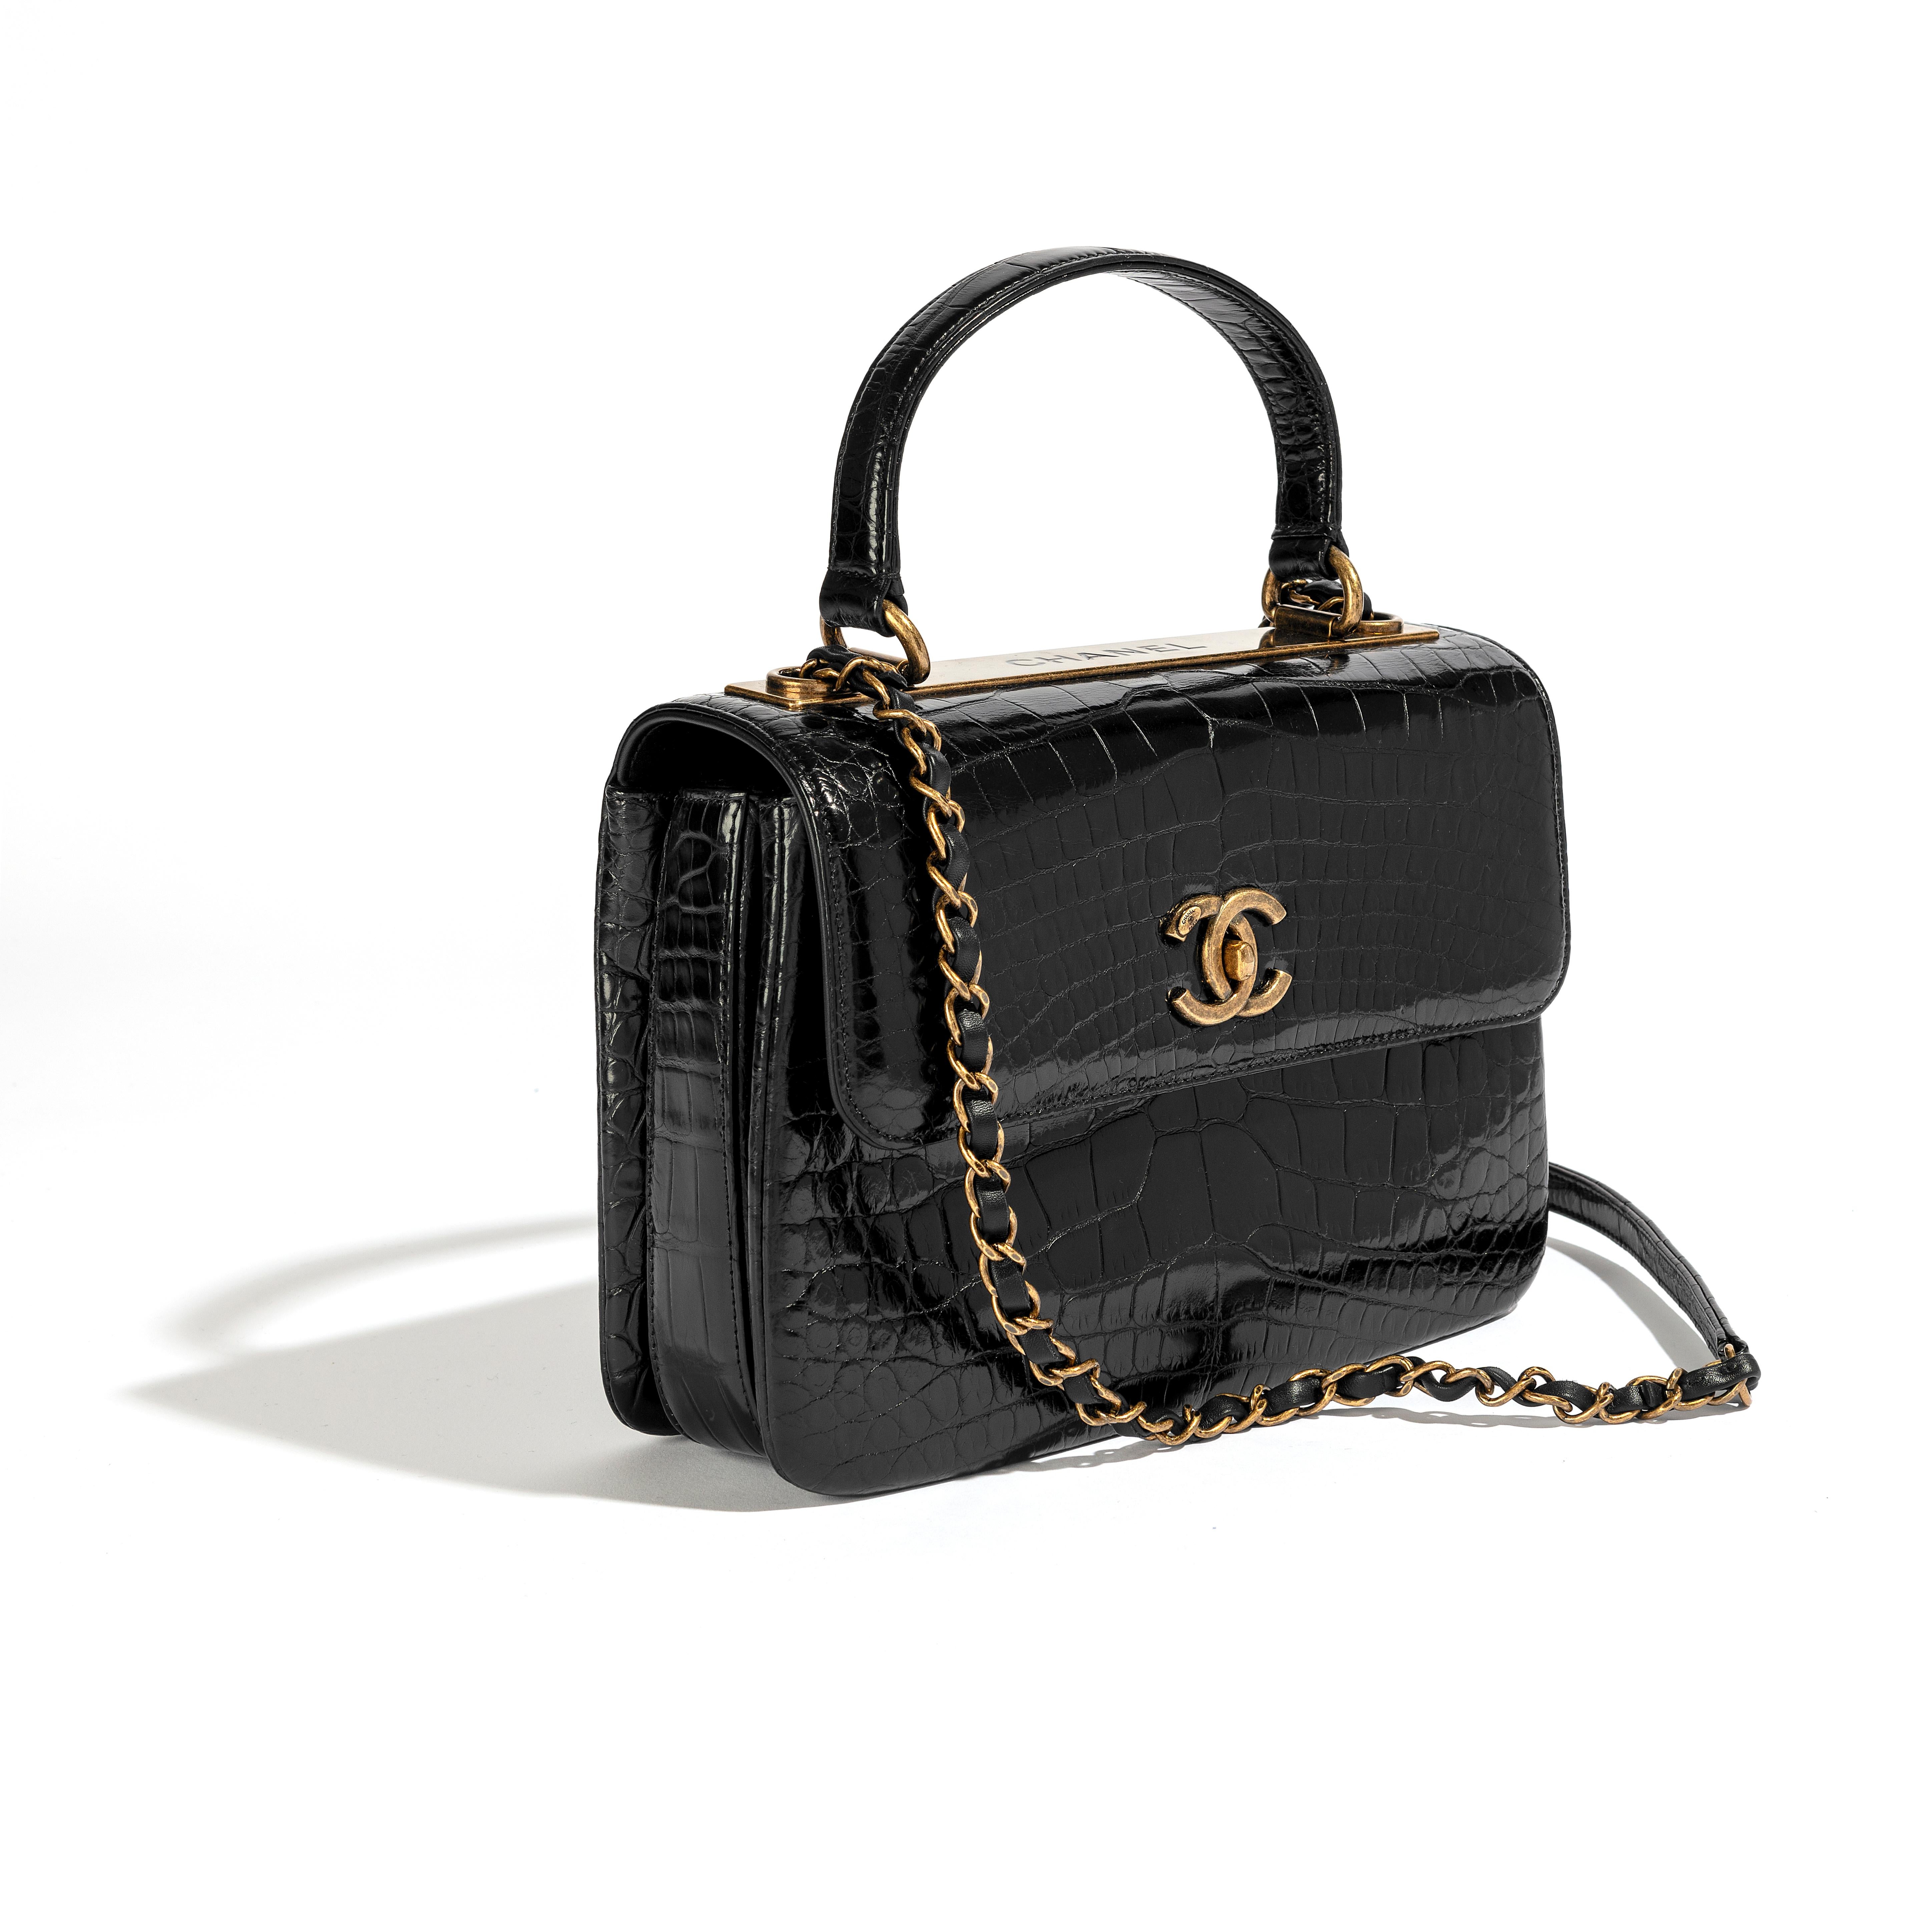 Chanel Black Top Handle Flap Bag In Good Condition For Sale In London, GB